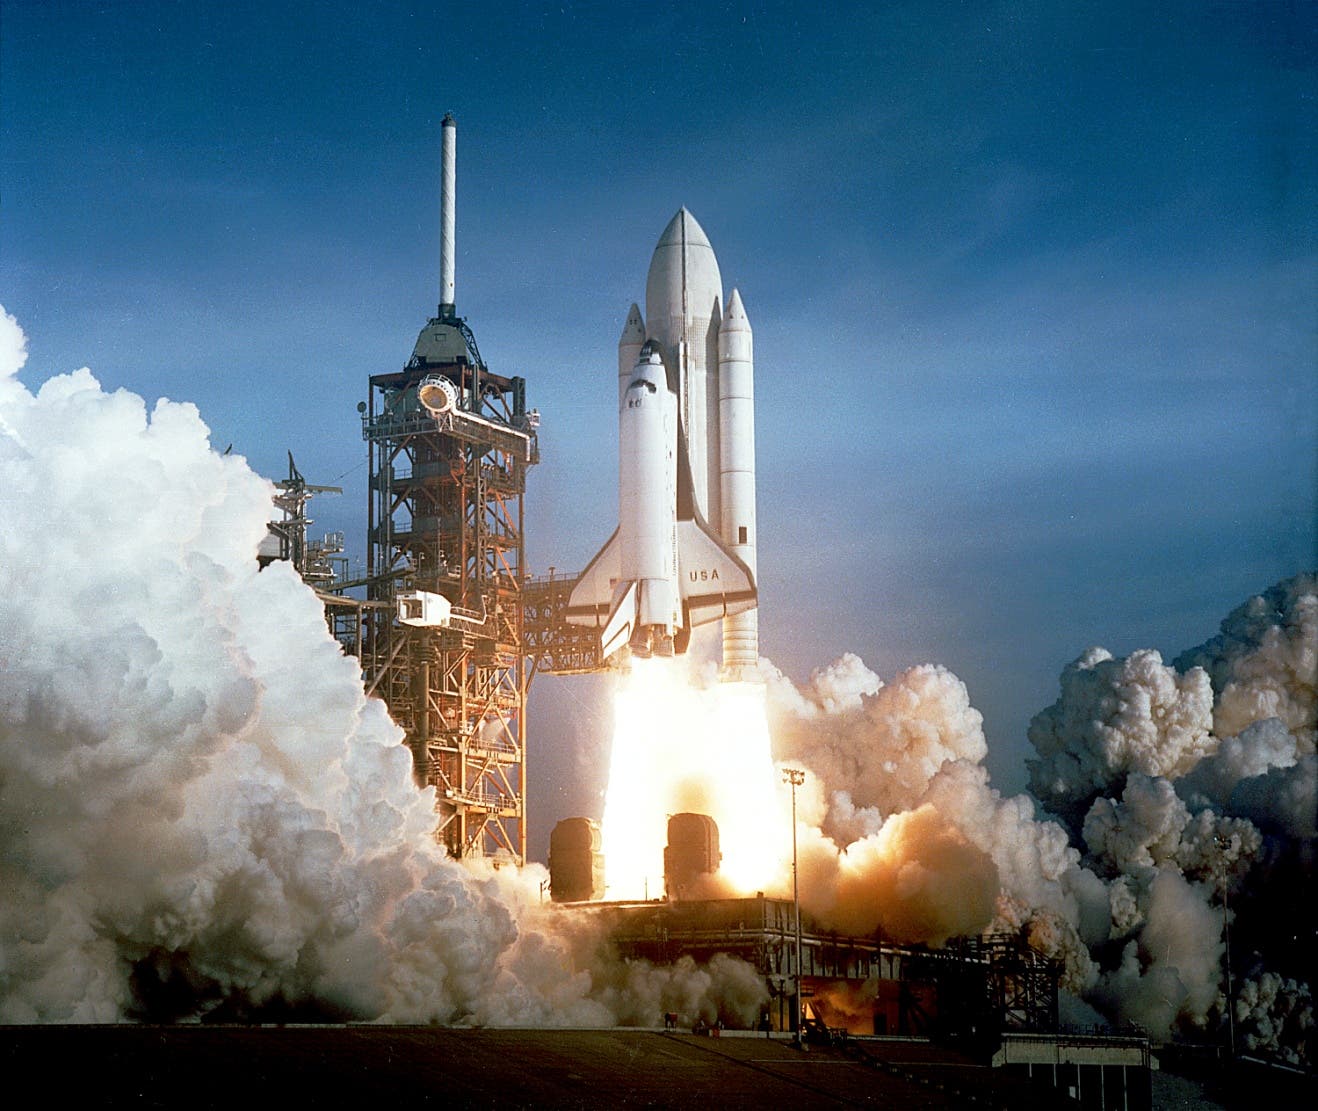 The Discovery shuttle departs the Kennedy Space Center in Florida on June 17, 1985 at 7:33 AM local time.  (Included)